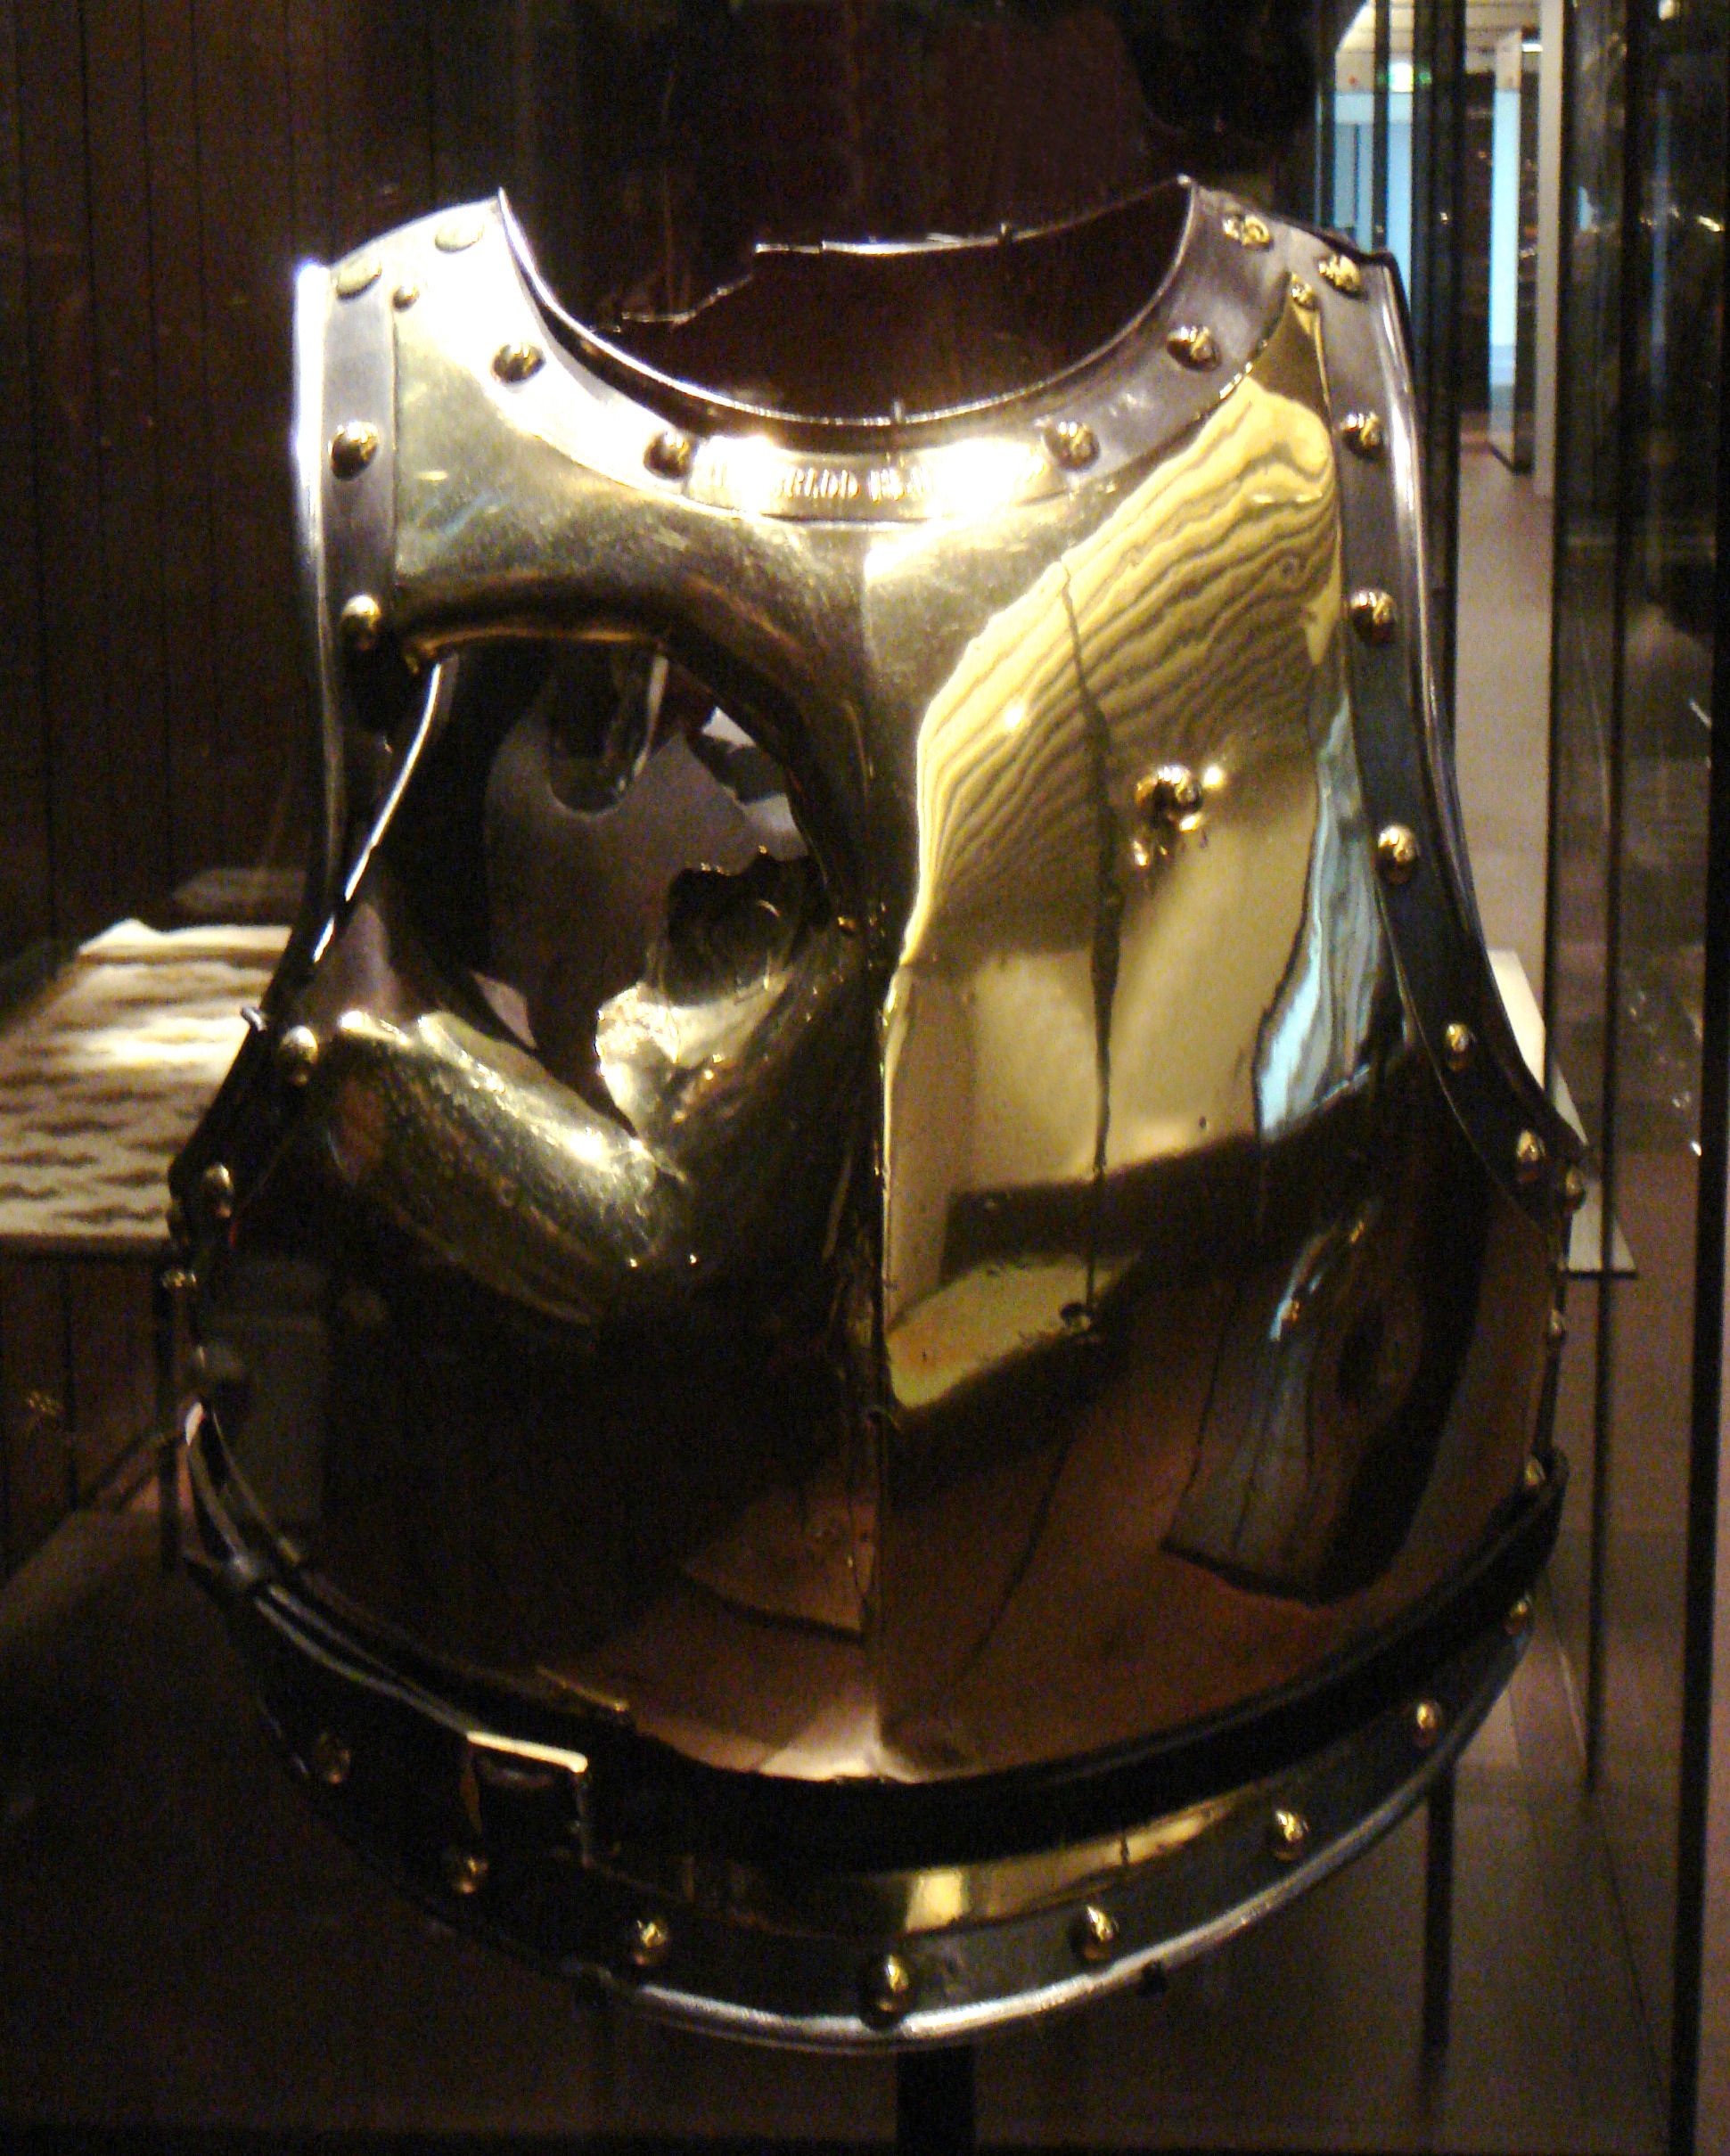 Cuirass holed by a cannonball at Waterloo